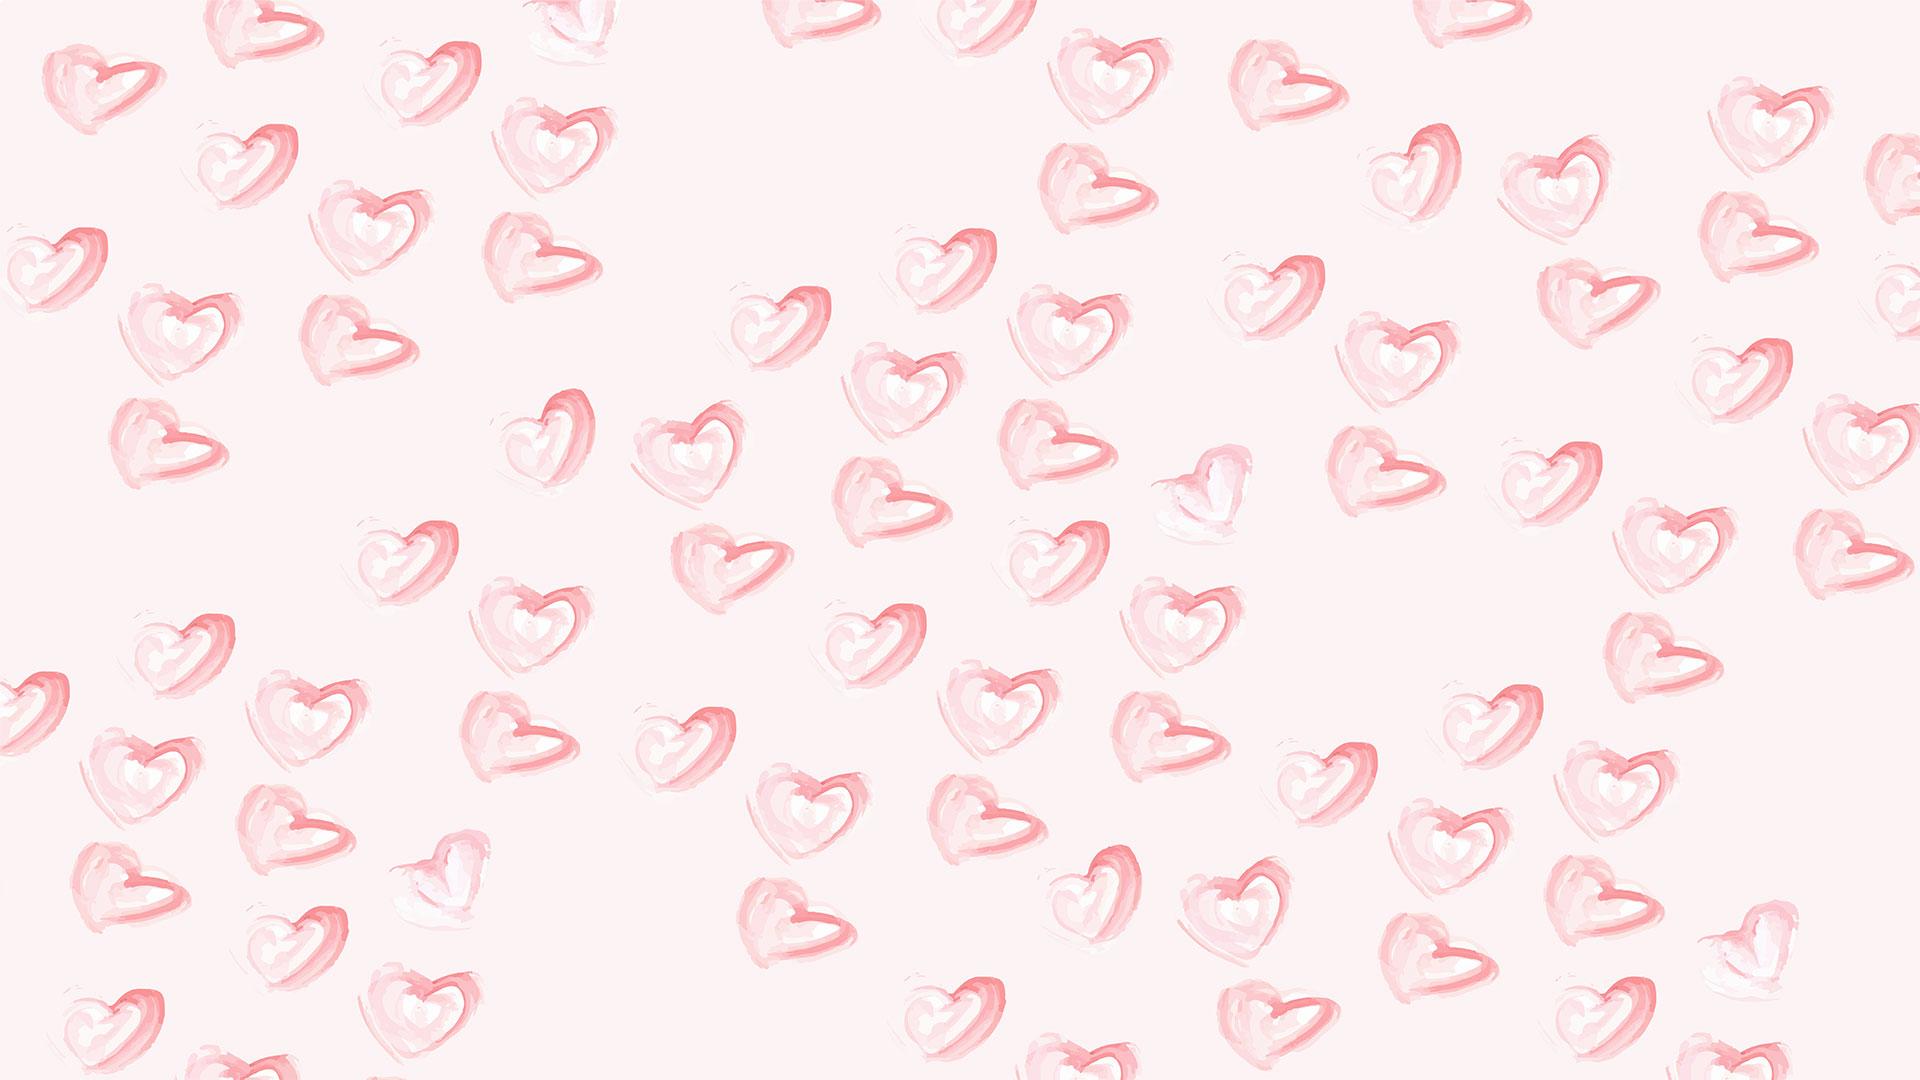 Aesthetic Hearts Wallpapers - Wallpaper Cave